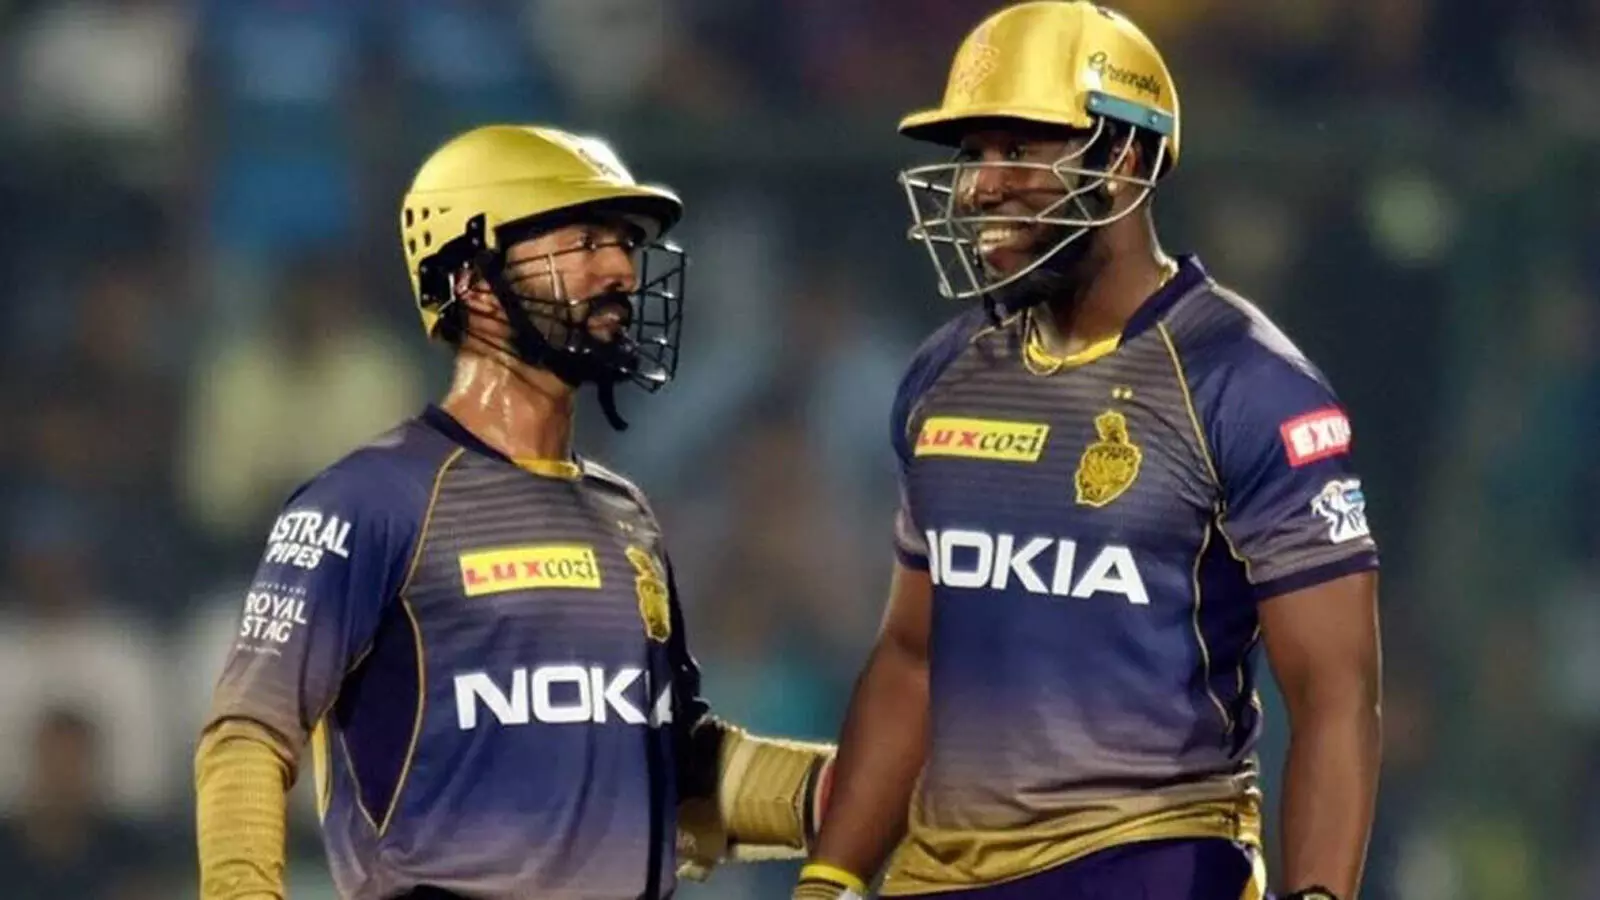 WATCH: Dinesh Karthik floored by Andre Russell shot in KKR practice match